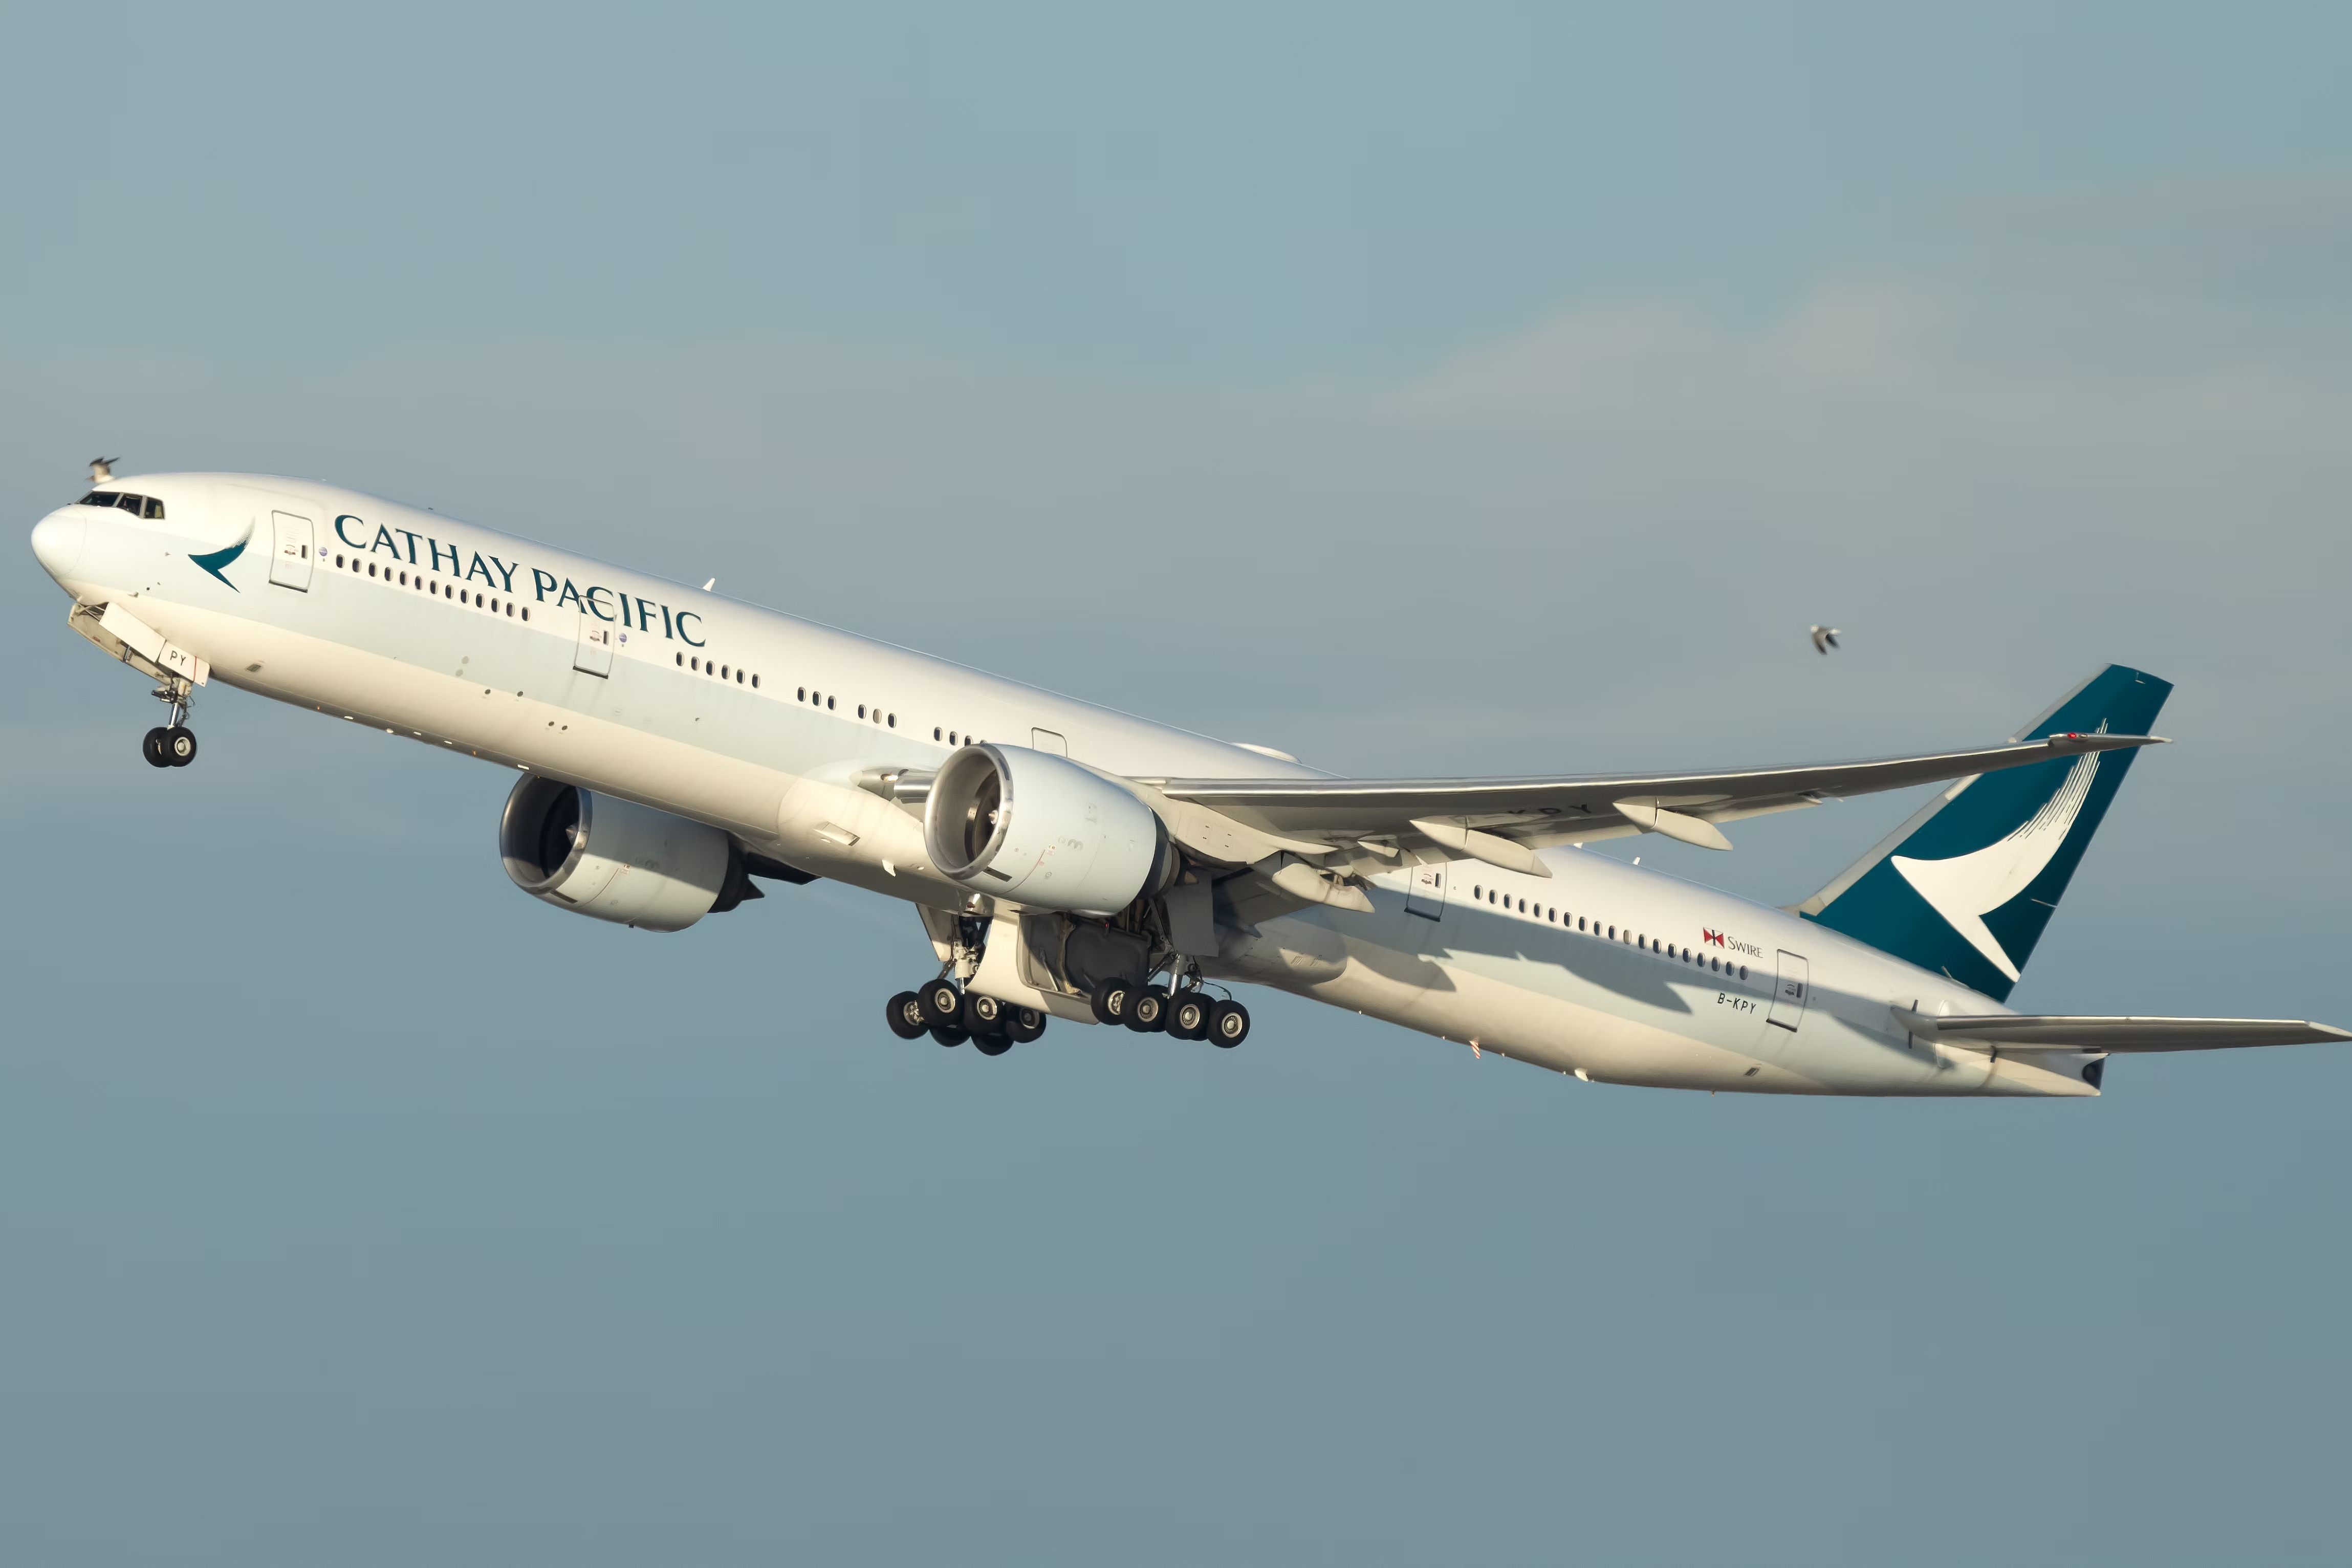 A Cathay Boeing 777-300ER flying in the sky.